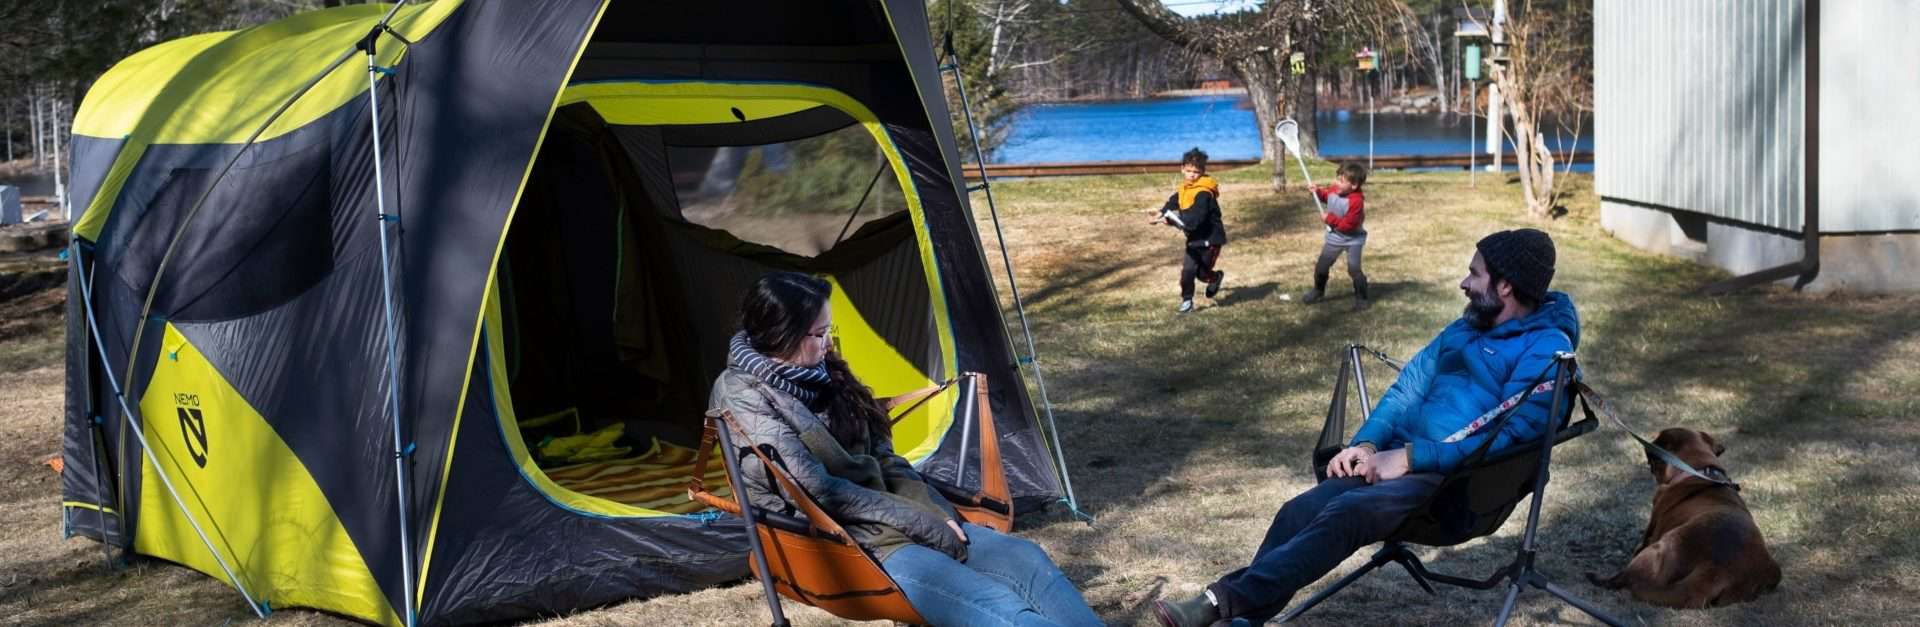 The Nemo Wagontop family tent with kids playing outdoors on a camping trip